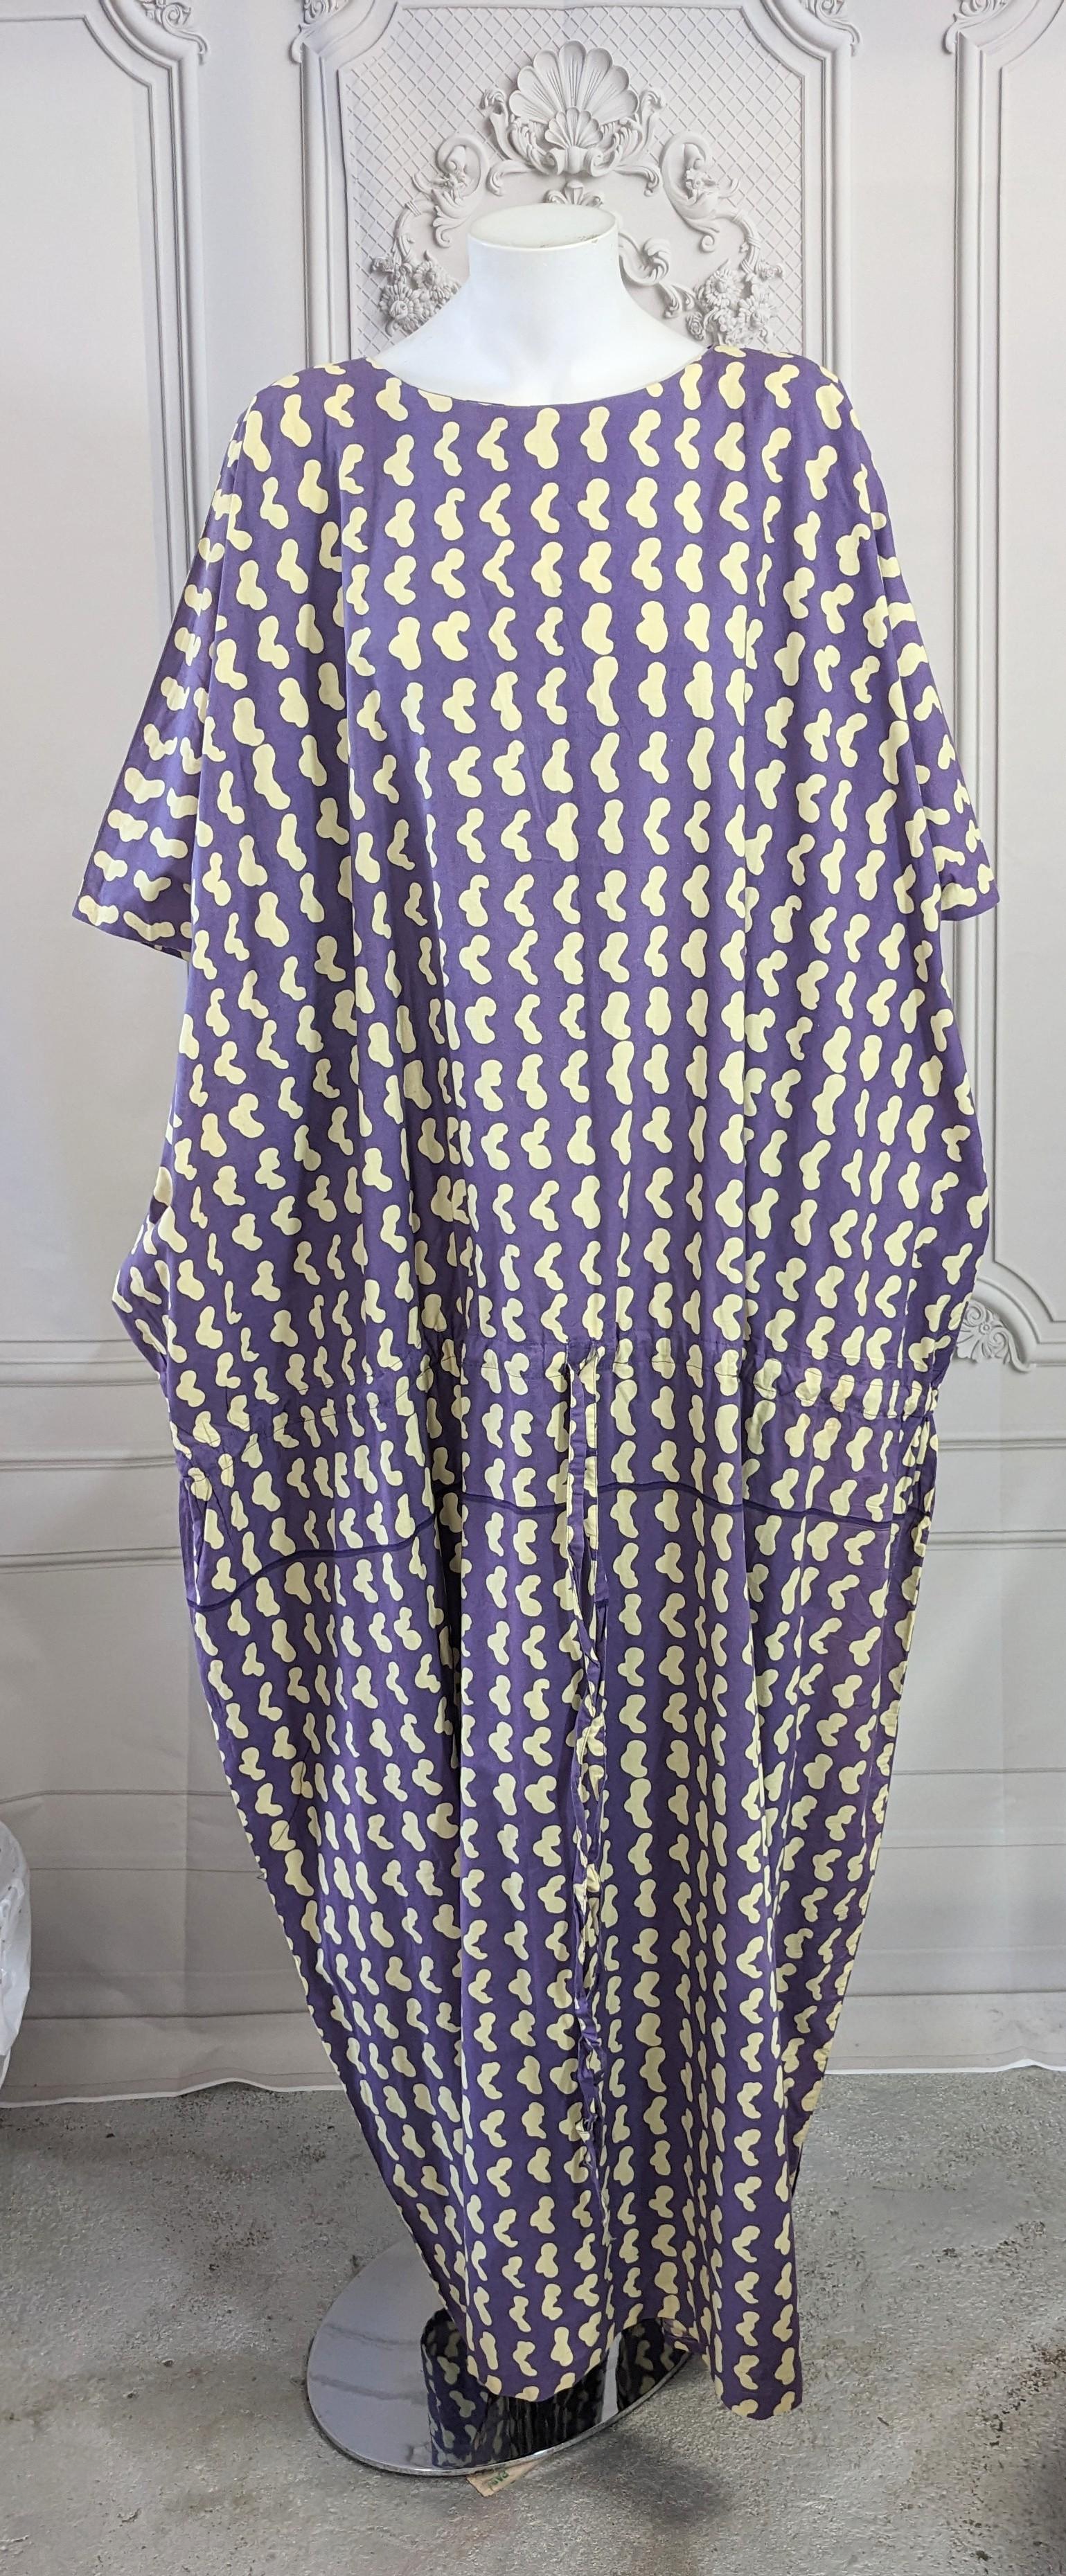 Charming Marimekko Cotton Drawstring Caftan from the 1970's. A huge folded cotton rectangle in signature Marimekko graphic print has one drawstring just below the hip to adjust as needed. The print also has a purple line printed just below